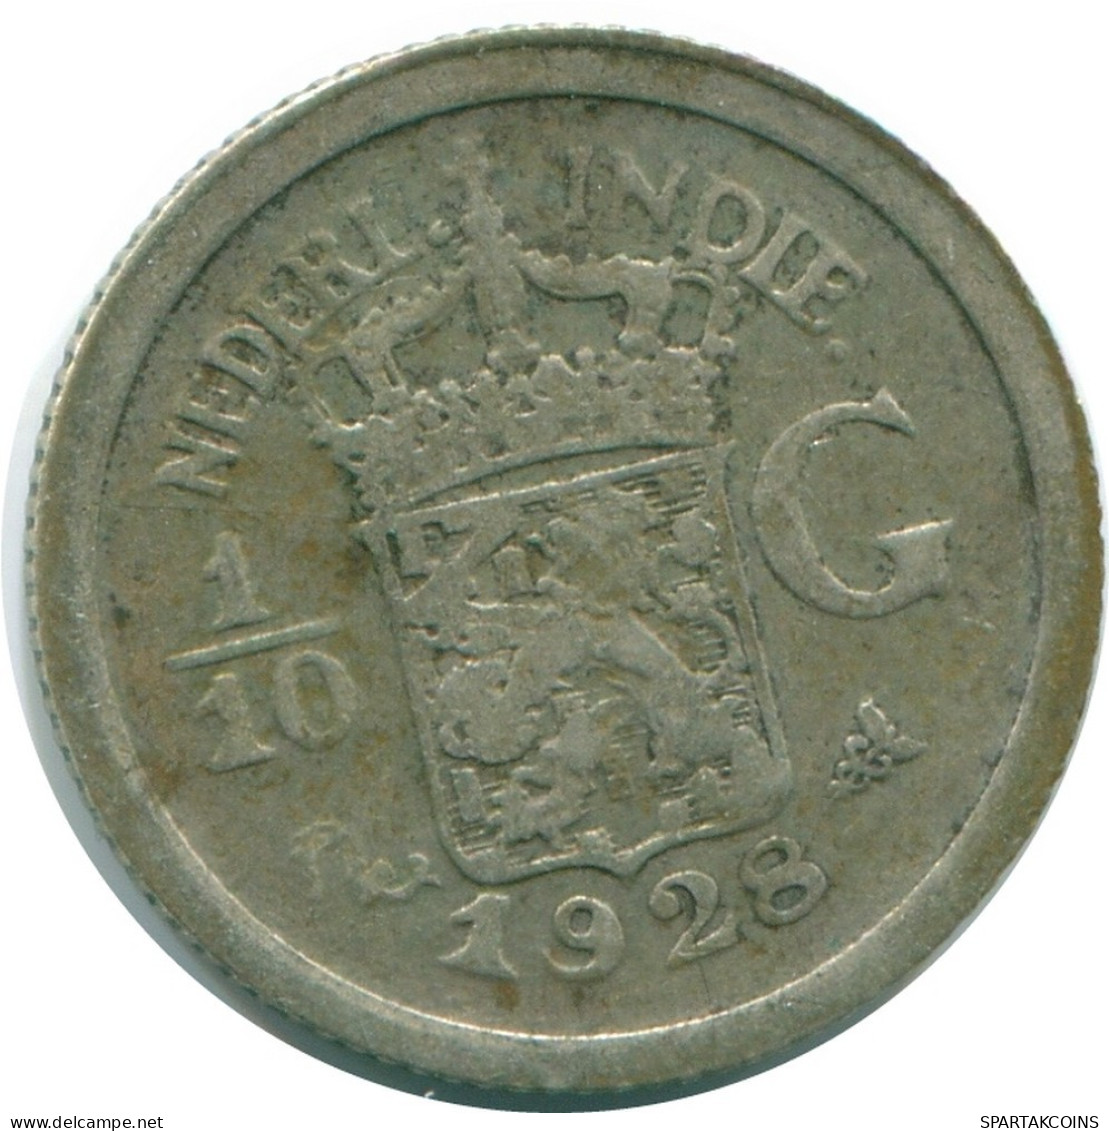 1/10 GULDEN 1928 NETHERLANDS EAST INDIES SILVER Colonial Coin #NL13437.3.U.A - Indes Neerlandesas